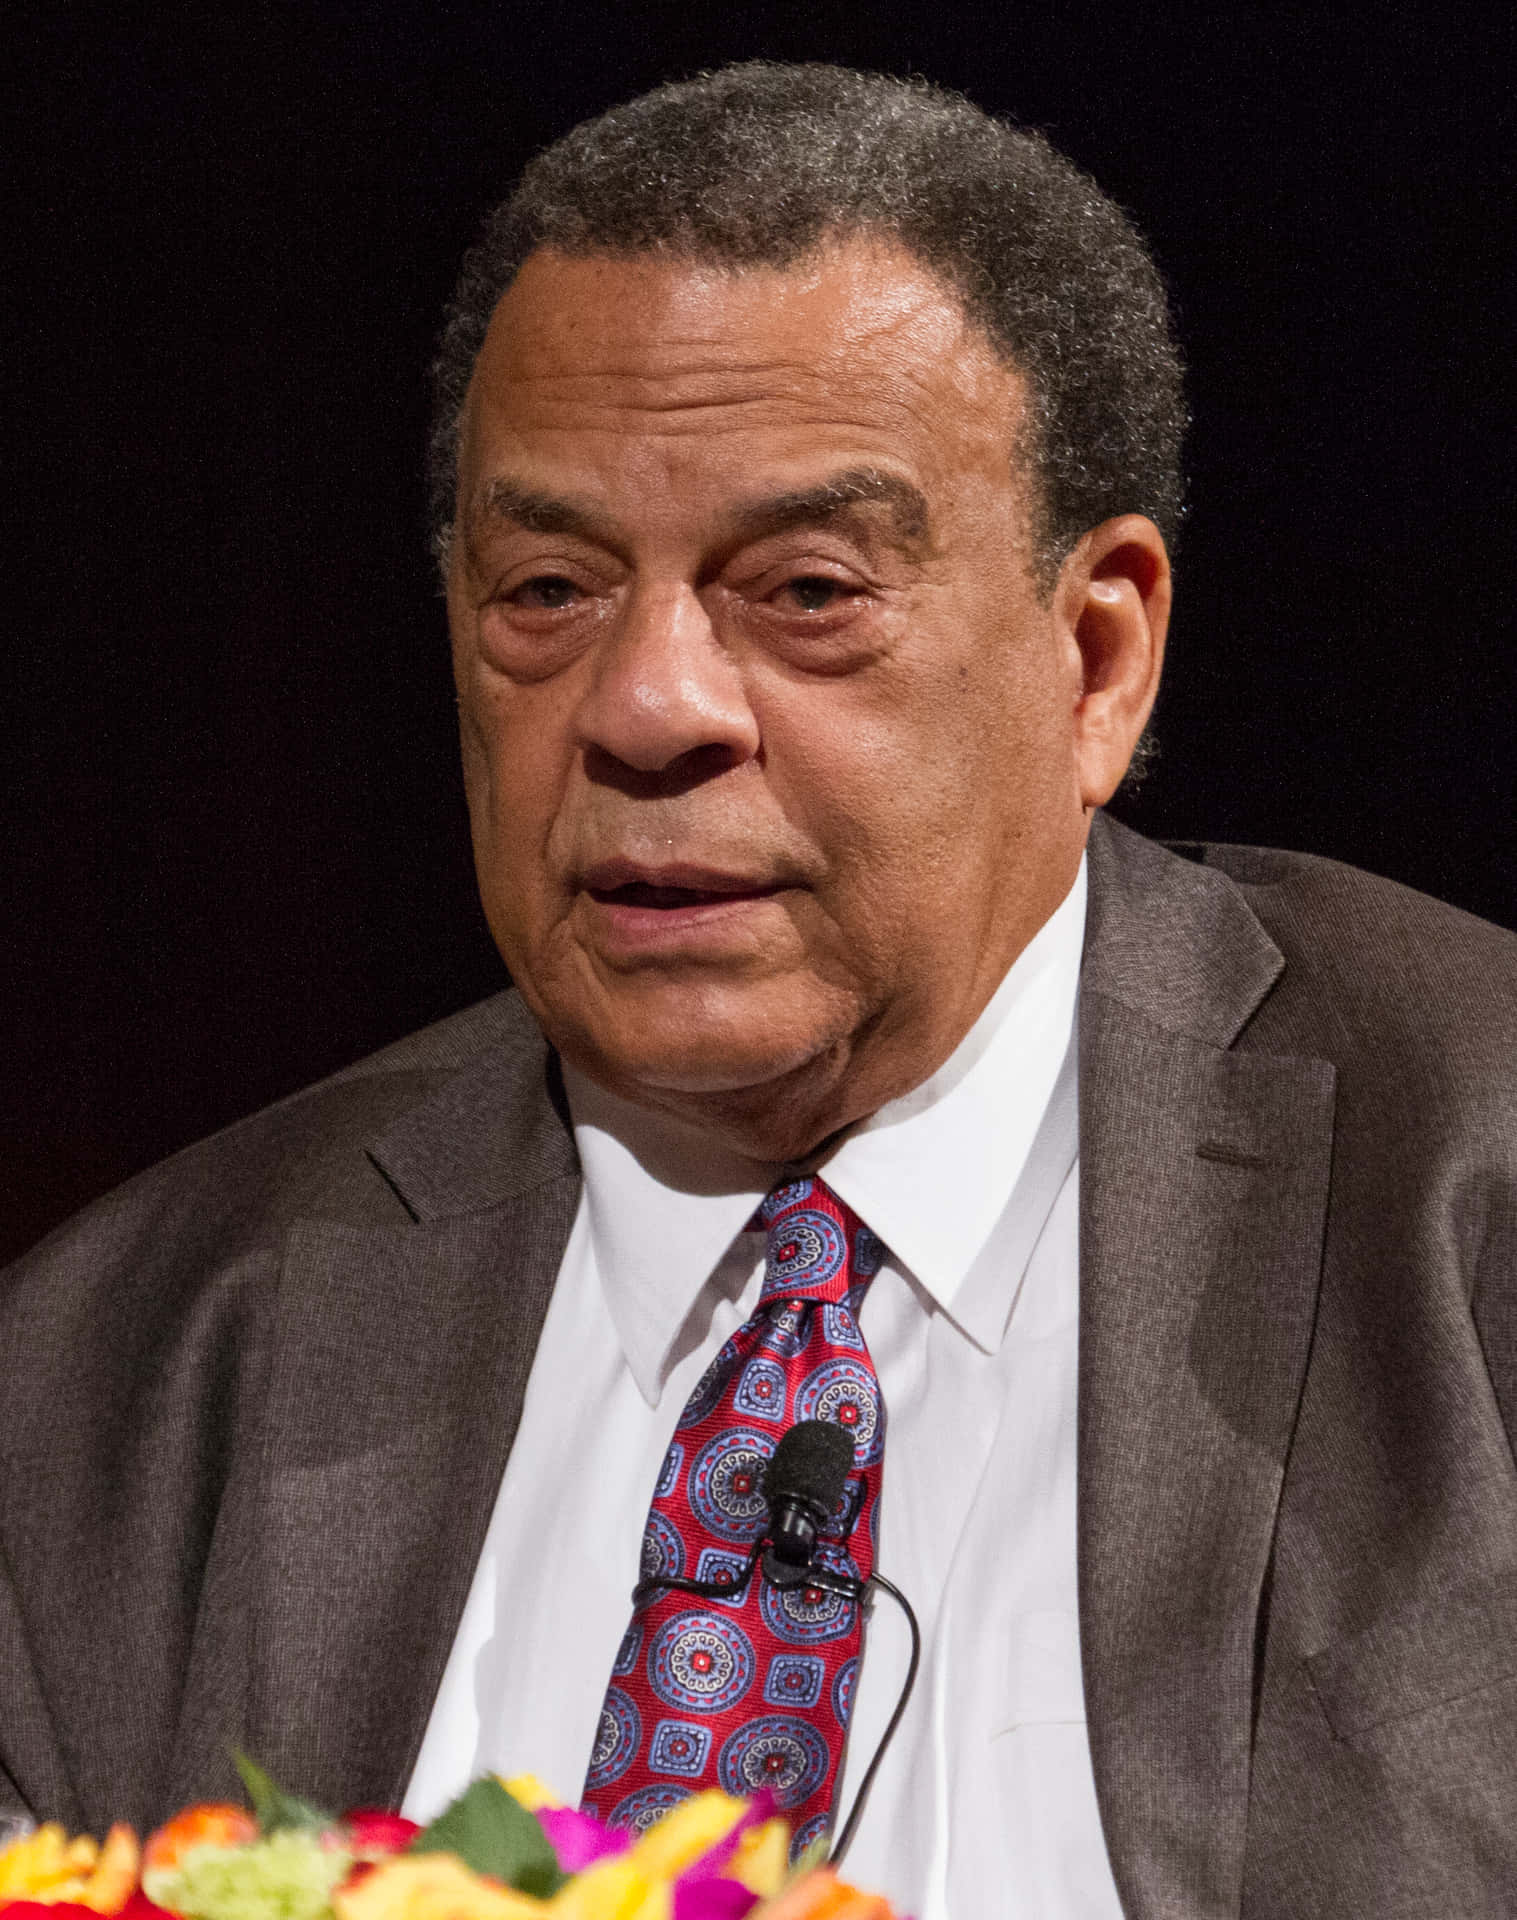 Andrew Young In Front Of Flowers Wallpaper